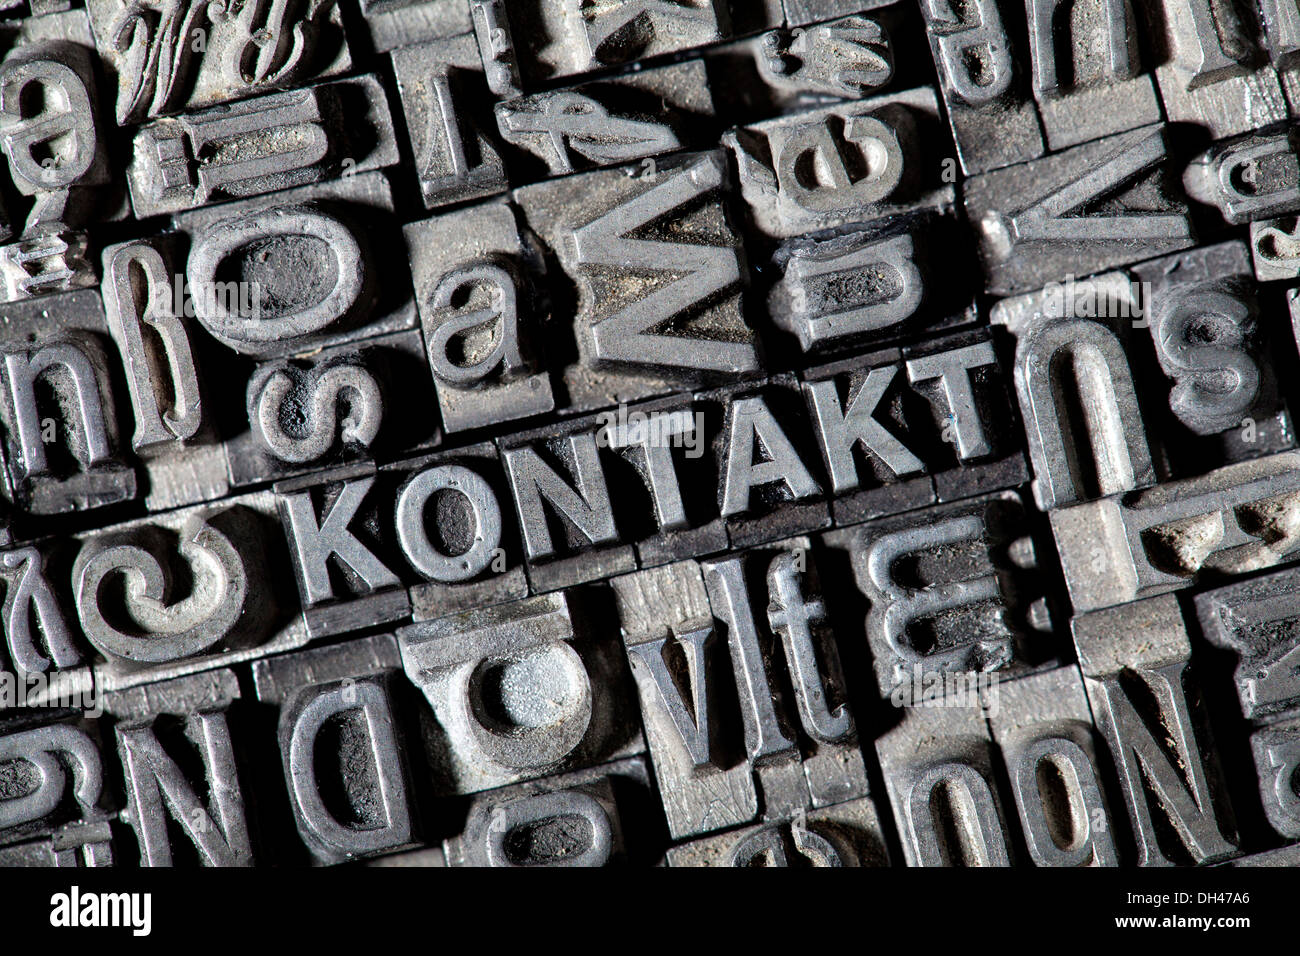 Old lead letters forming the word 'KONTAKT', German for 'CONTACT' Stock Photo